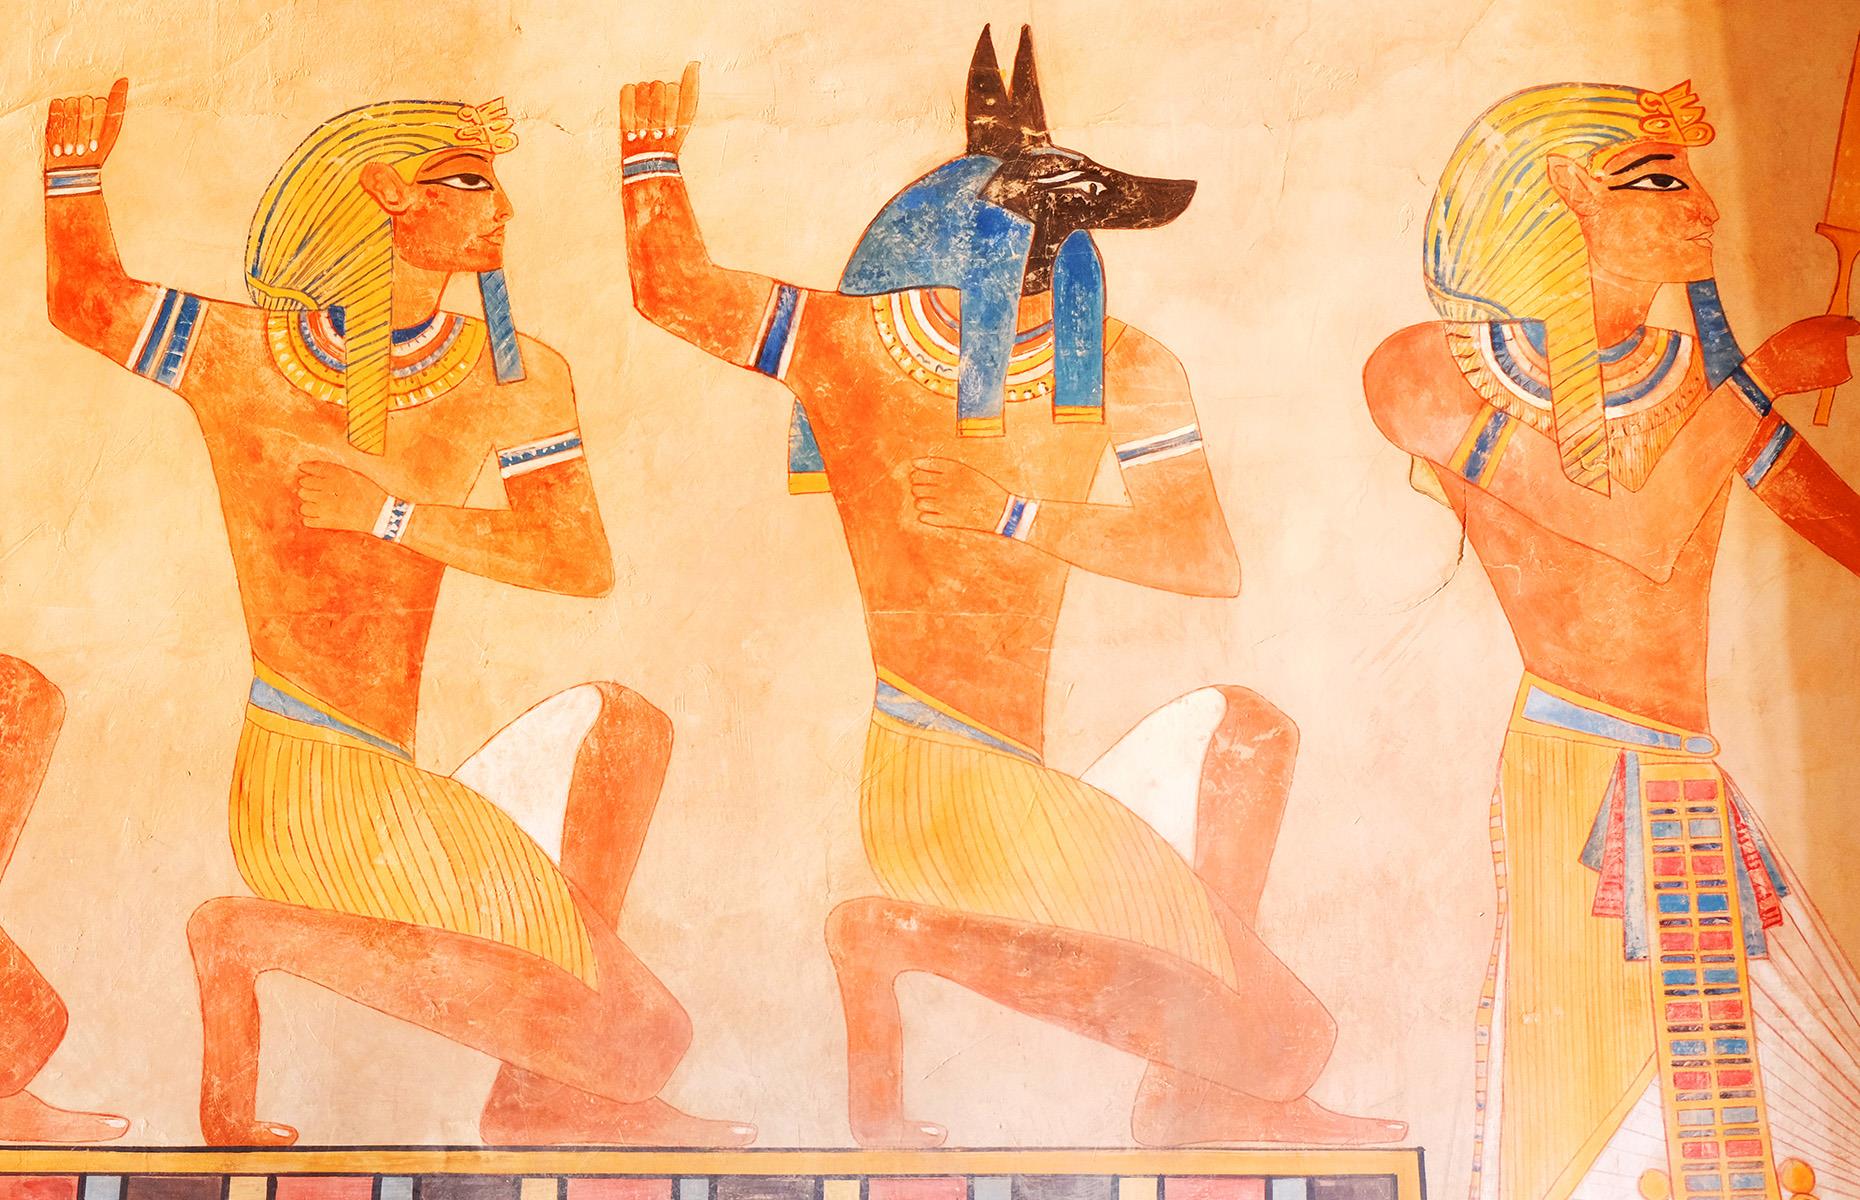 <p>When<em> Walk Like An Egyptian</em> by The Bangles was a huge hit back in 1986, the dancefloors were full of people with their arms extended, bent at right angles, one arm up, one down. Egyptians never walked that way, of course. The move was inspired by hieroglyphics from the time of the pharaohs. This pose was how the ancient Egyptians projected the three-dimensional human body onto a flat surface. Regardless, the song has inspired many travelers to seek out the wonders of Ancient Egypt, from the Great Pyramids of Giza to the temples of Karnak and beyond.</p>